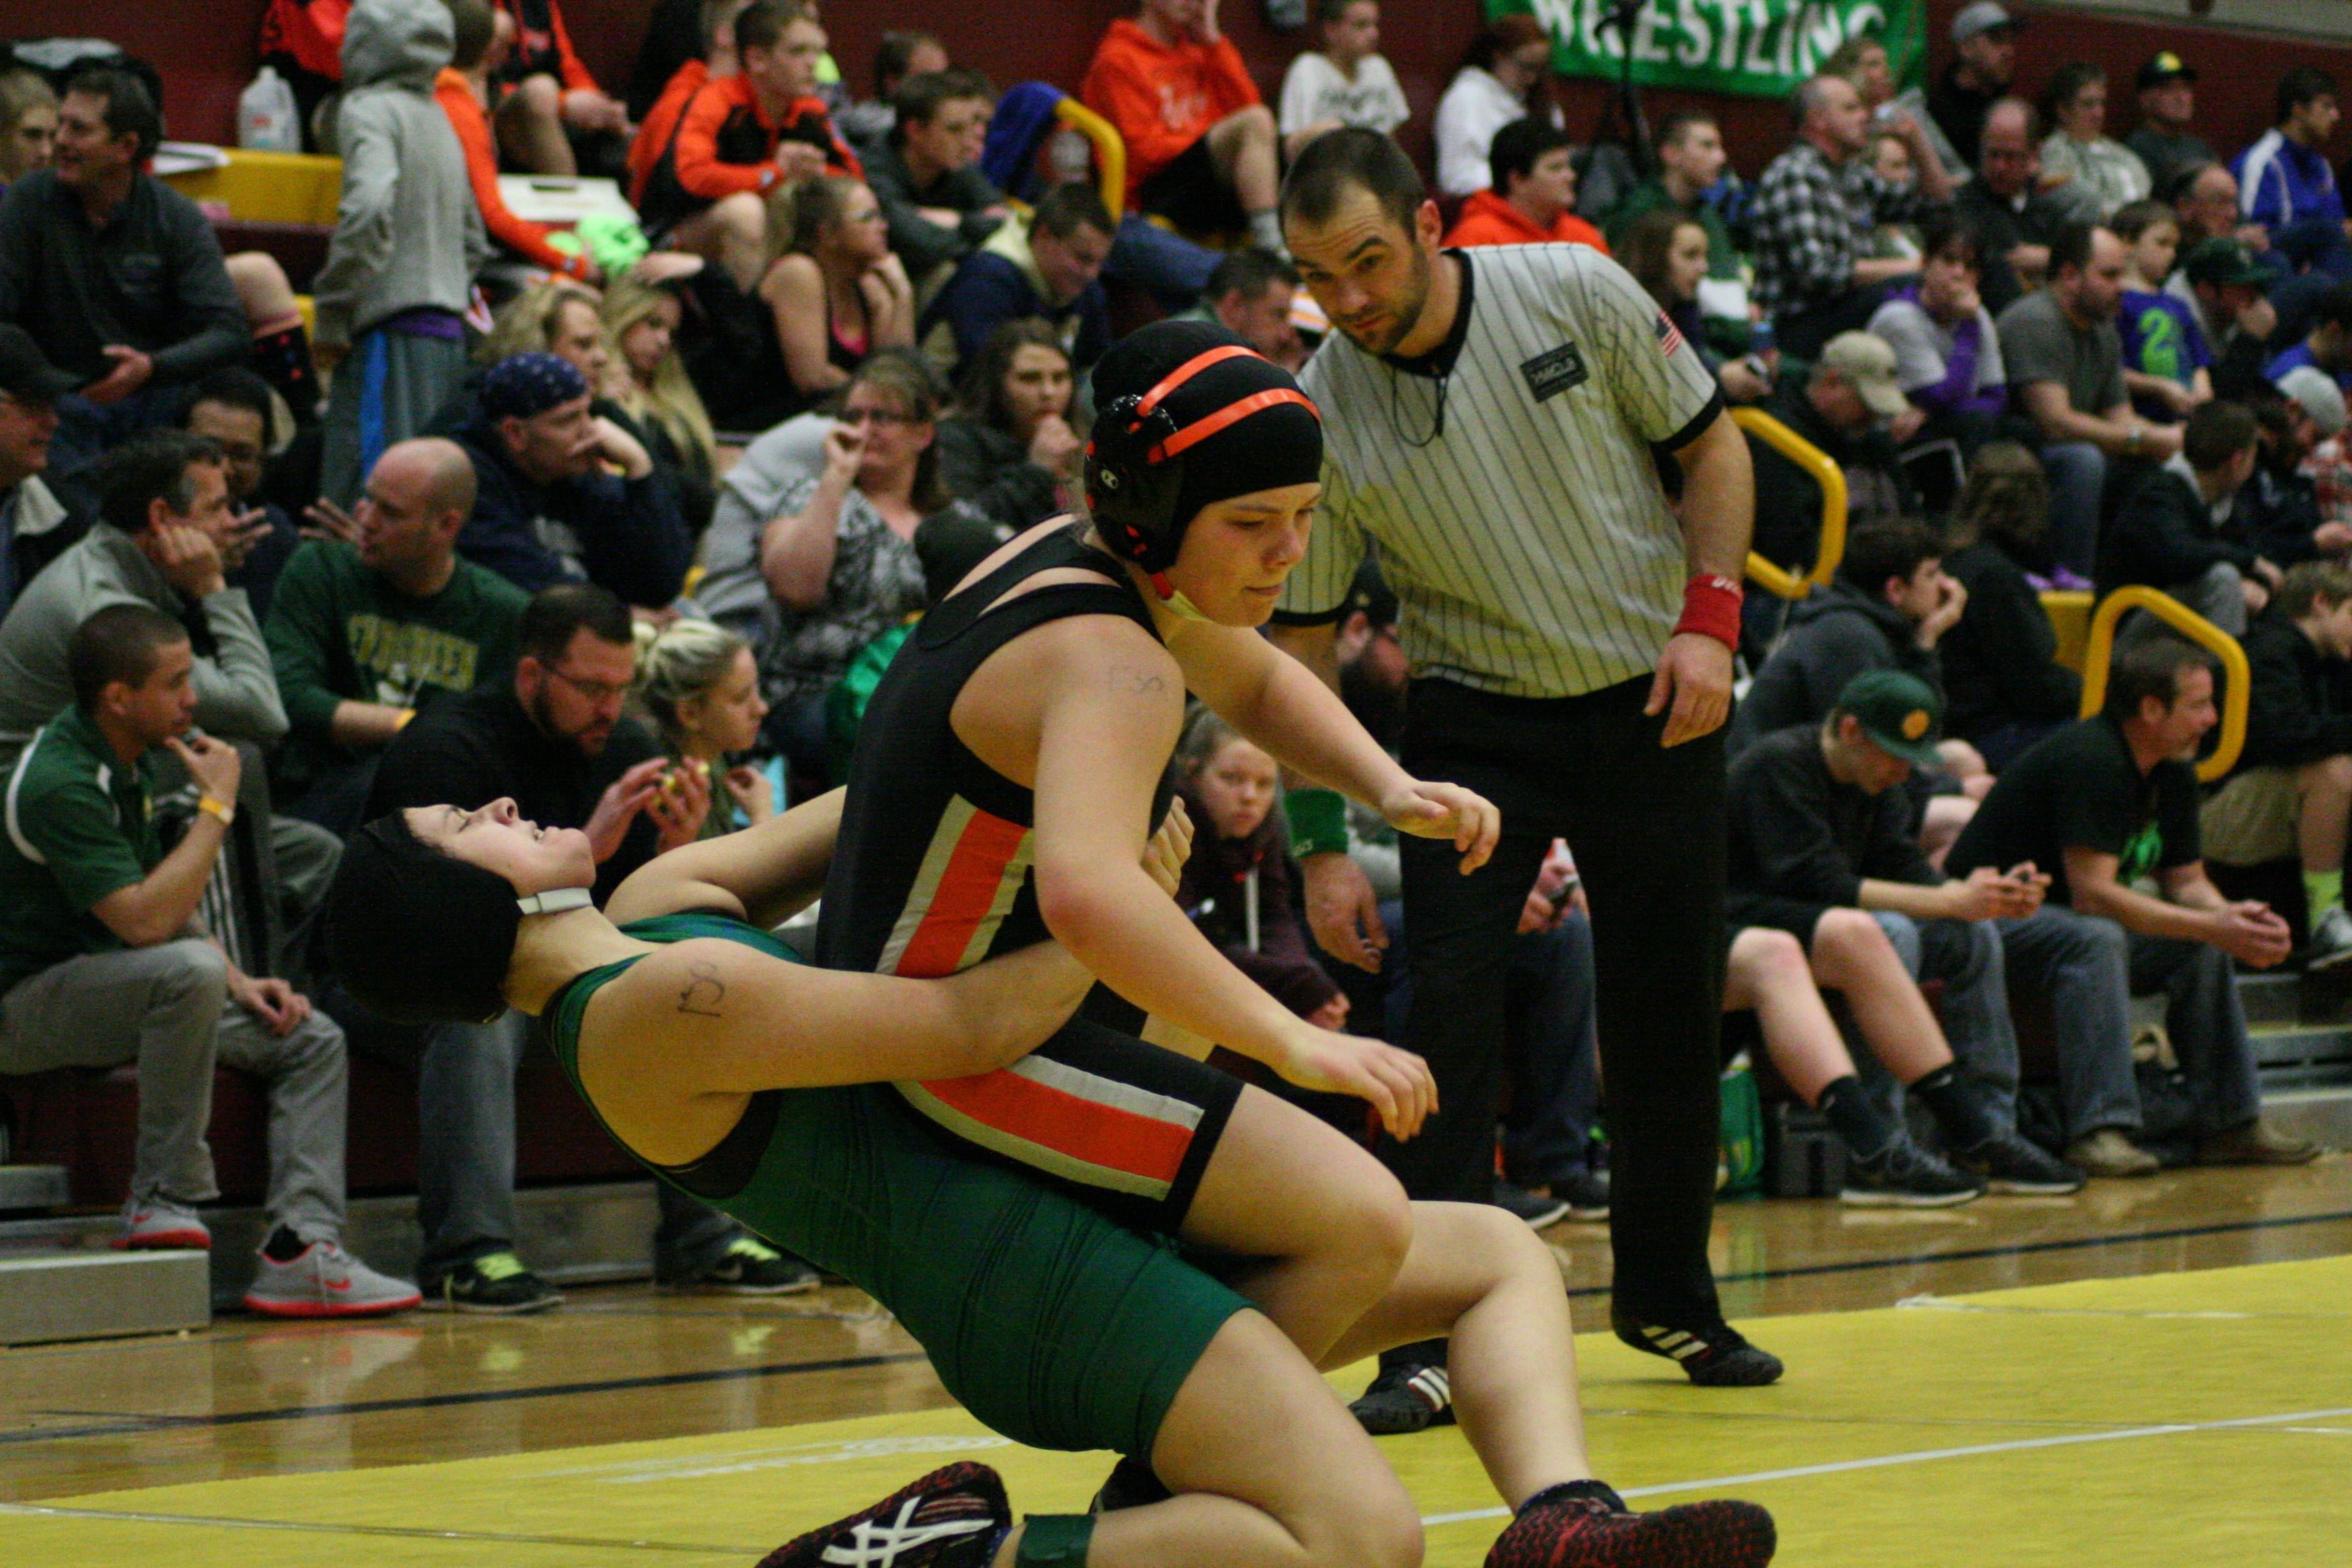 Washougal sophomore Mialisa Oster couldn't get away from her Mountain View opponent in the 130-pound county title match. Oster took second place in defeat.